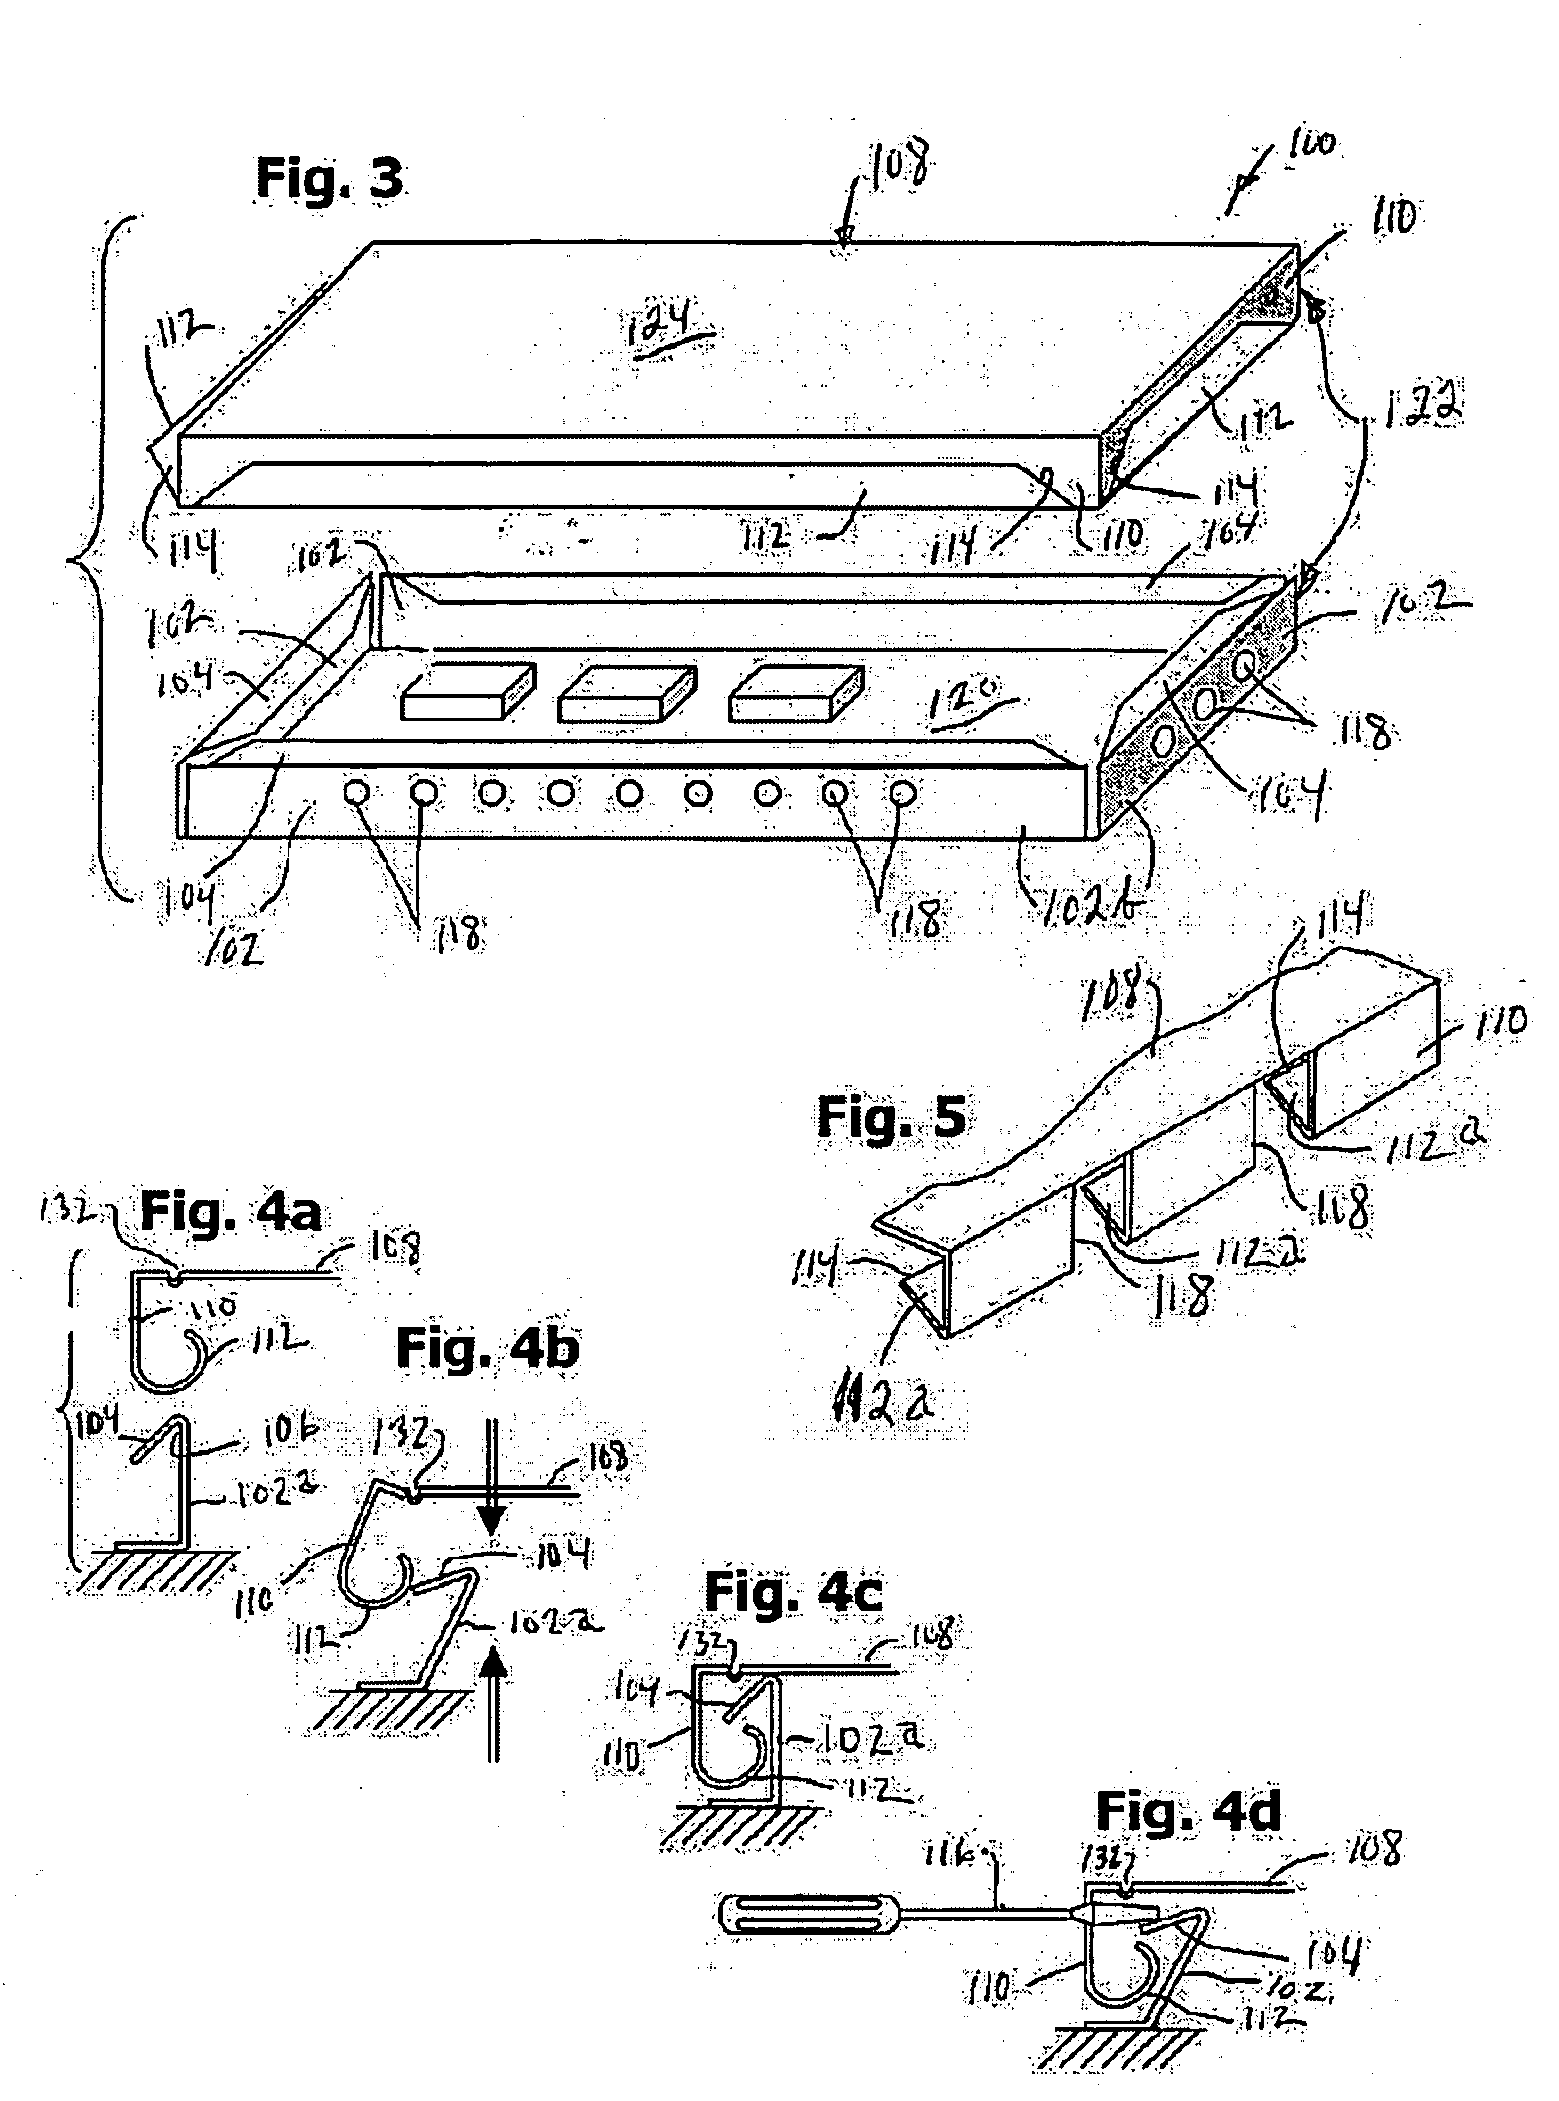 Electromagnetic shield assembly with opposed hook flanges